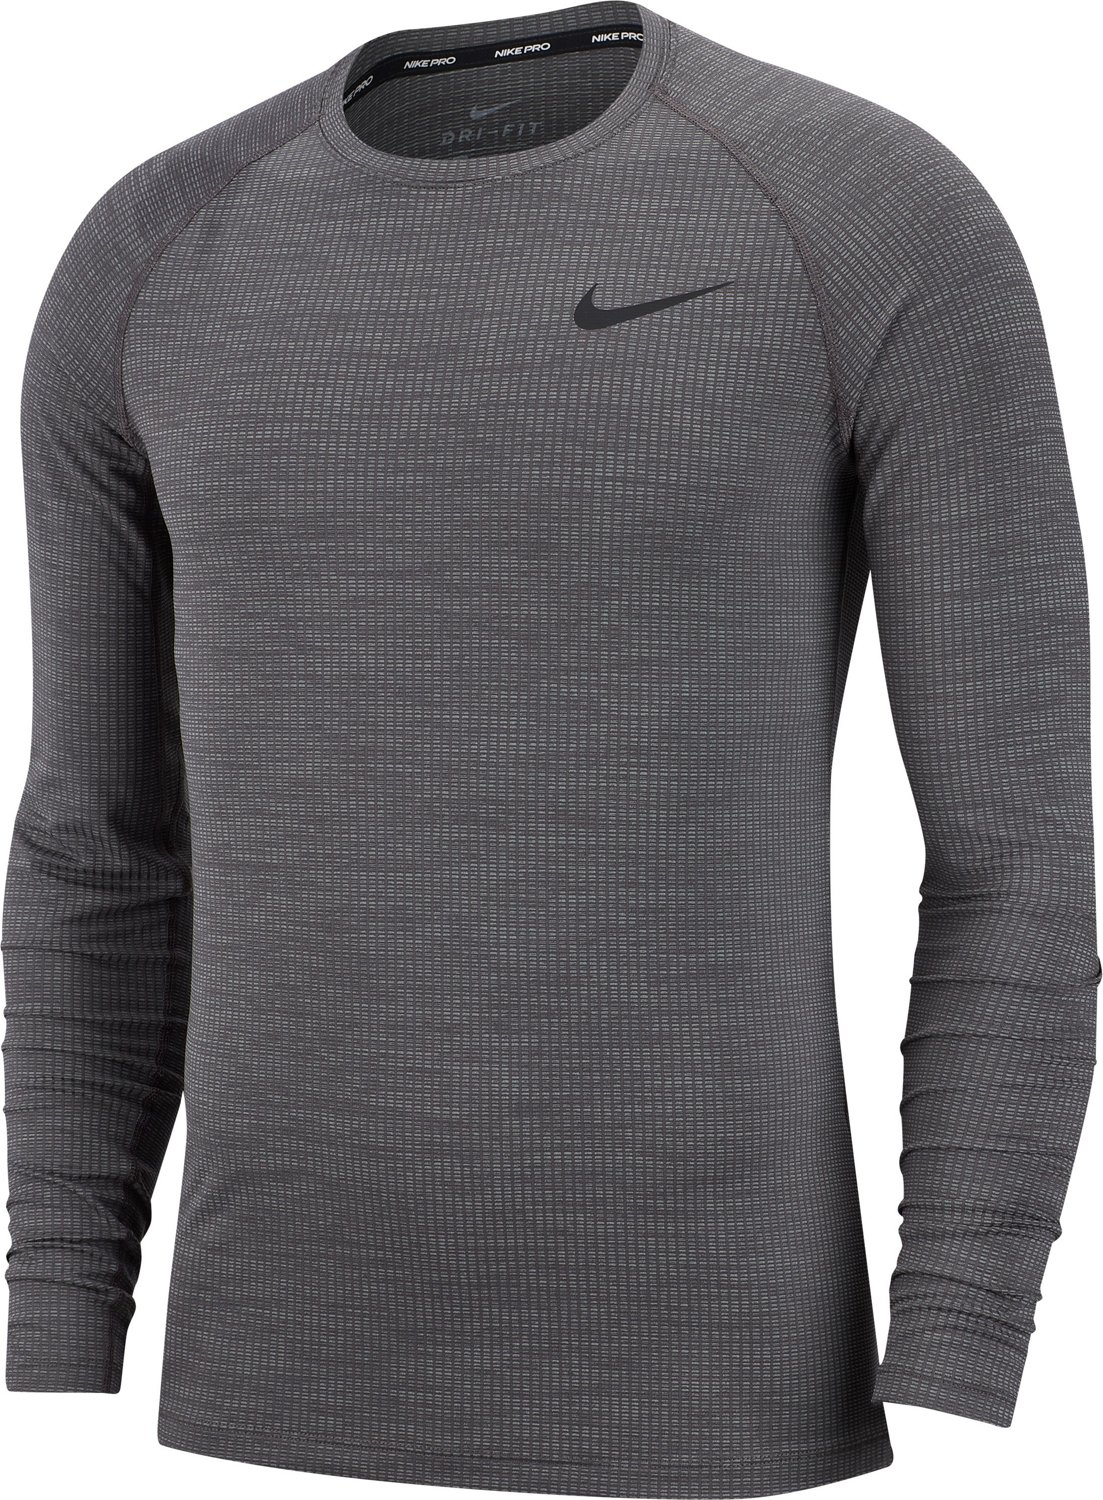 Nike Men S Pro Long Sleeve Fitted Training Top Academy